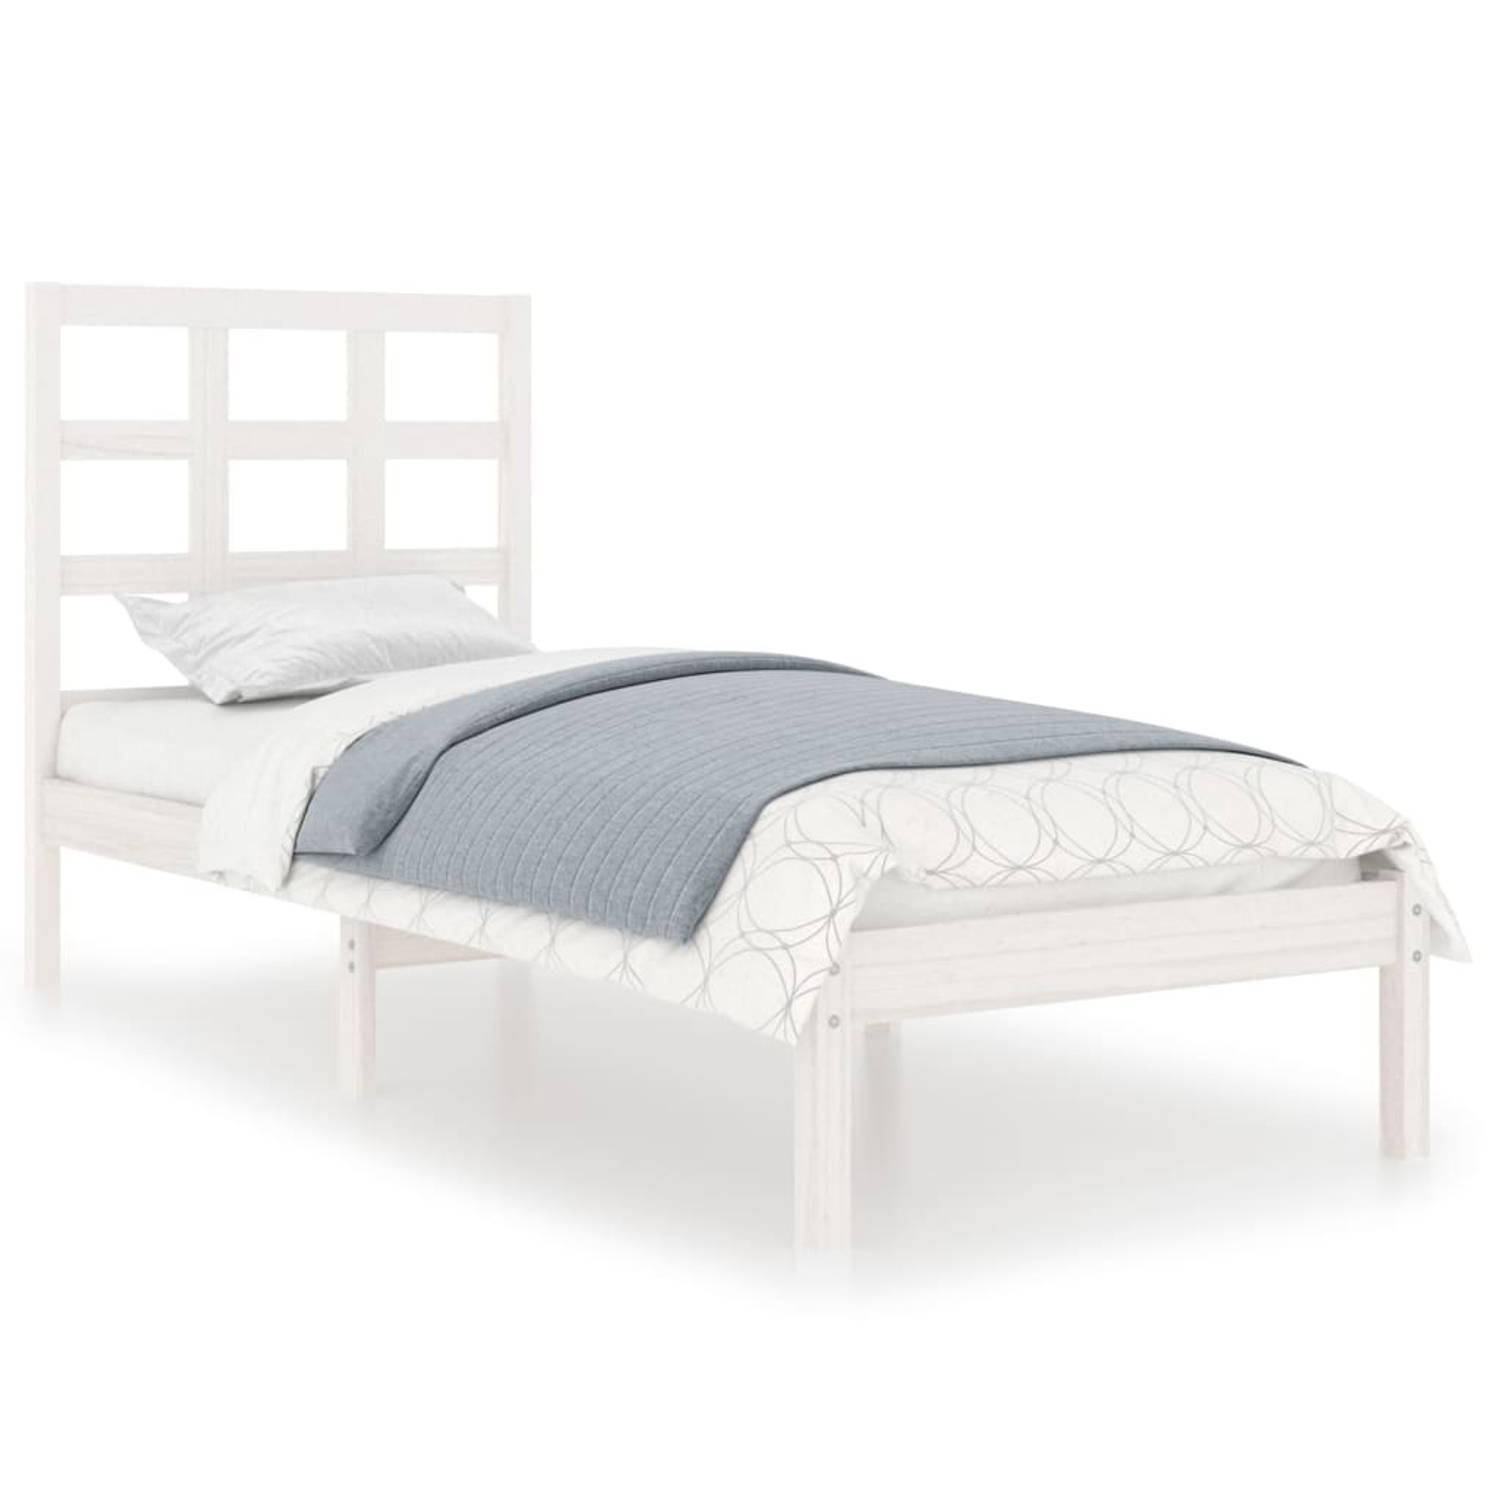 The Living Store Bedframe massief hout wit 90x200 cm - Bedframe - Bedframes - Eenpersoonsbed - Bed - Bedombouw - Ledikant - Houten Bedframe - Eenpersoonsbedden - Bedden - Bedombouw